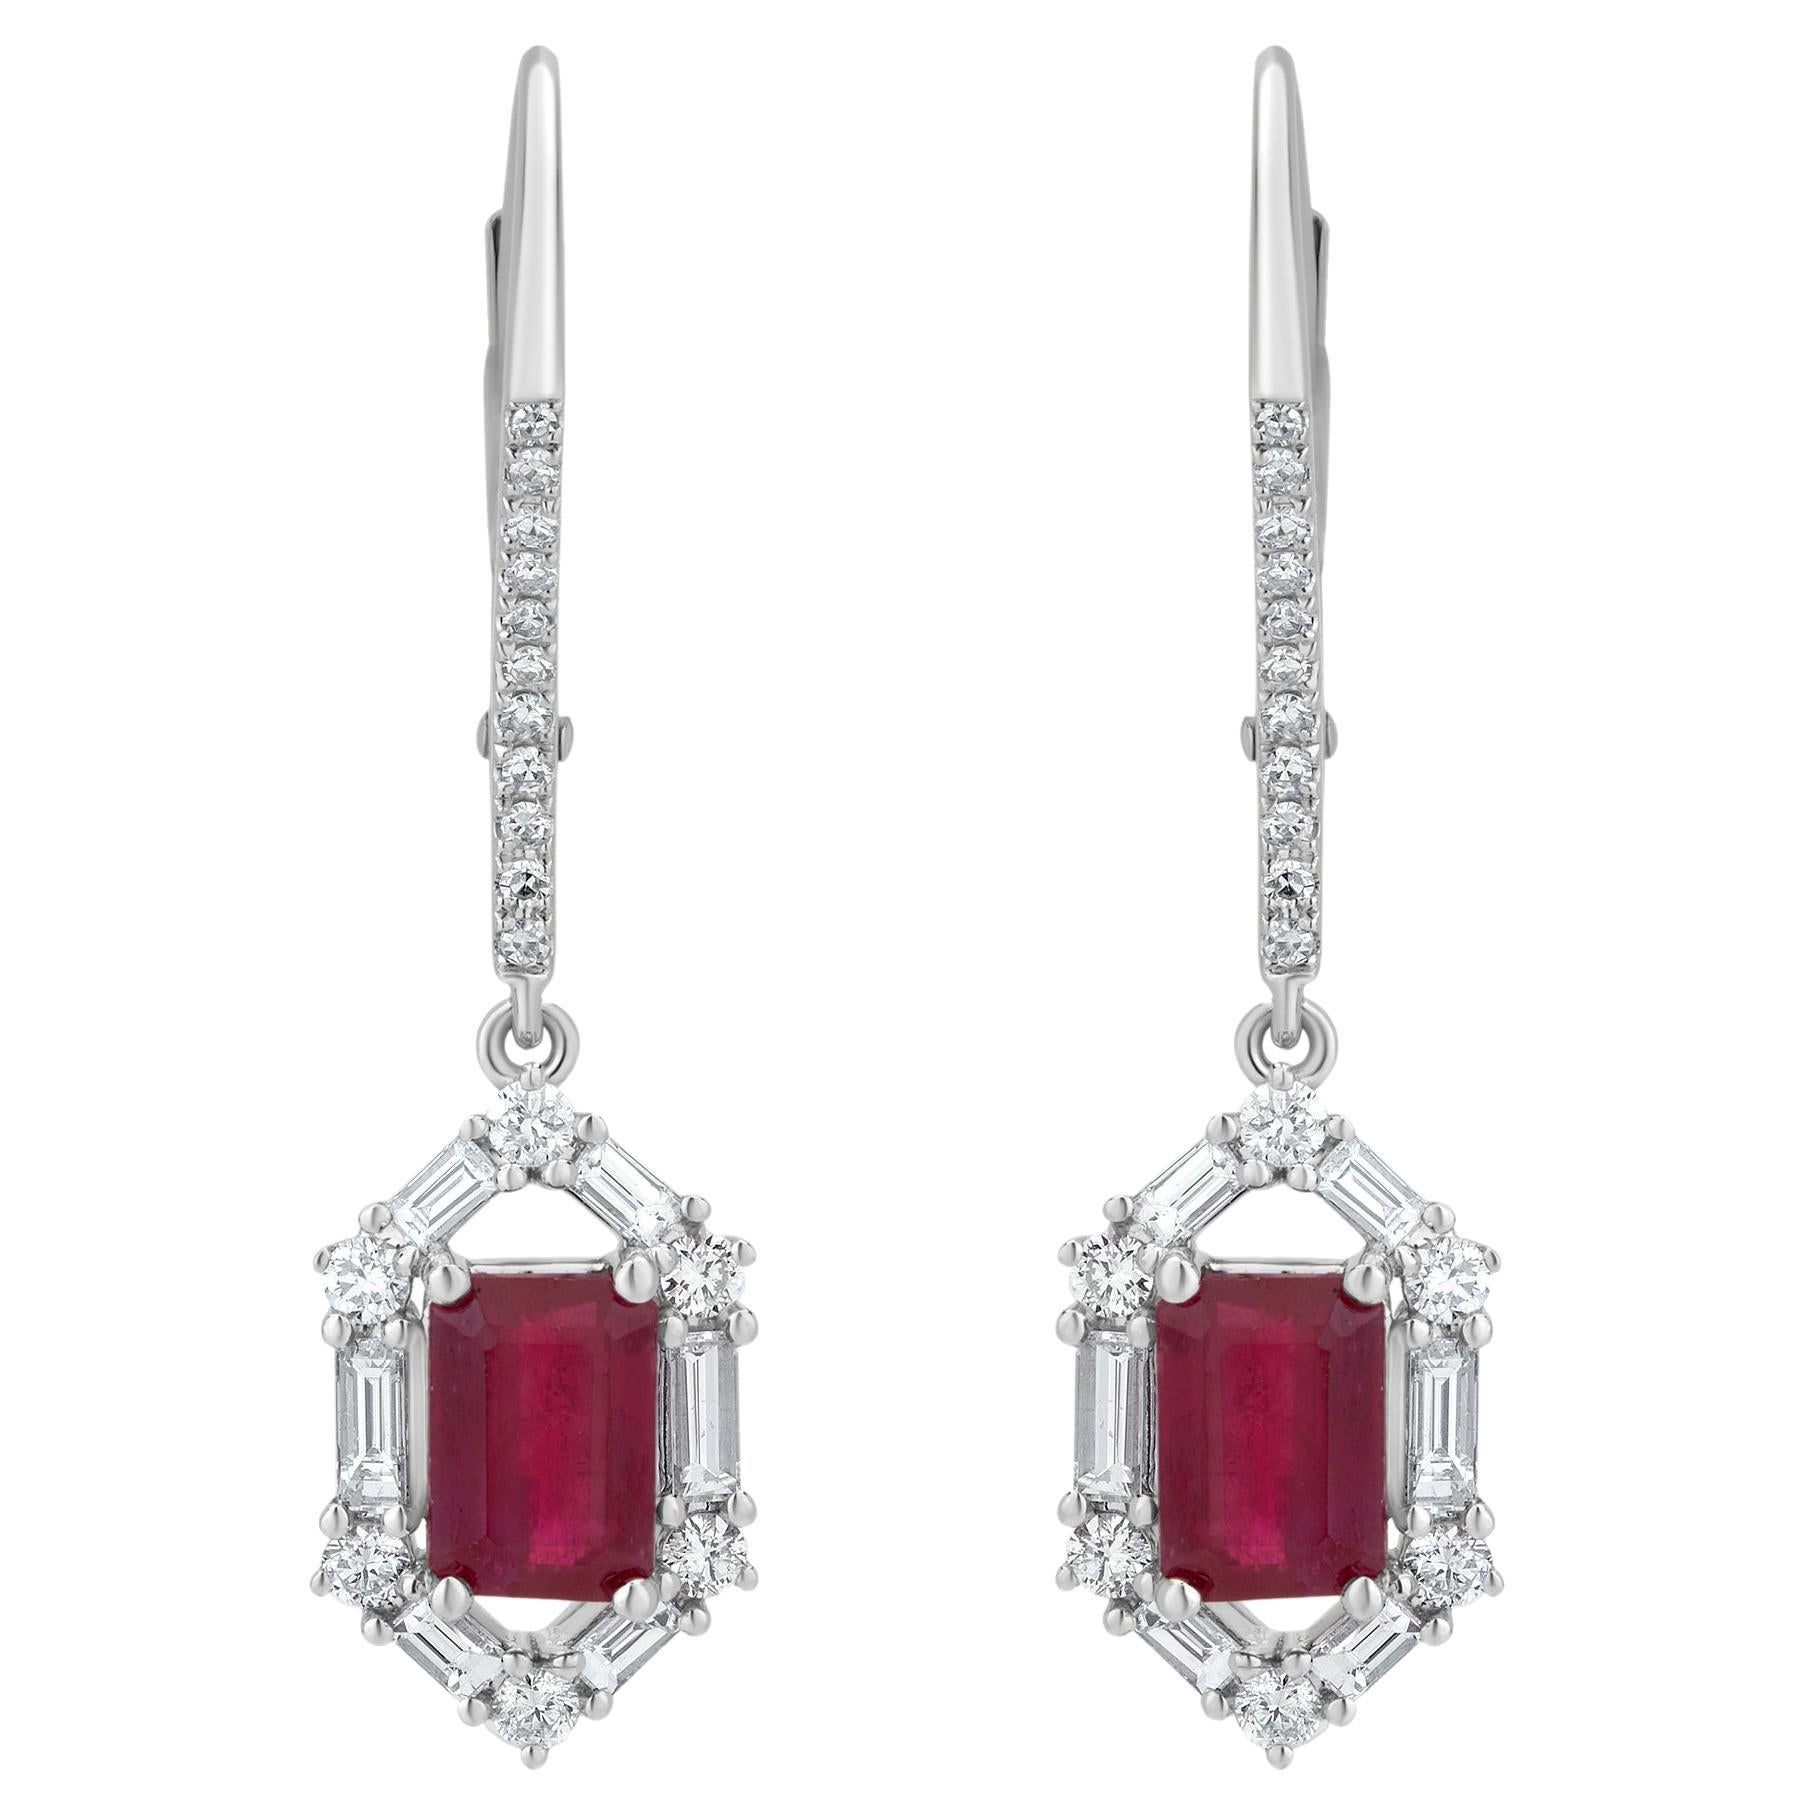 Gemistry 2.11 Cttw. Octagon Ruby and Diamond Drop Earrings in 18k White Gold For Sale